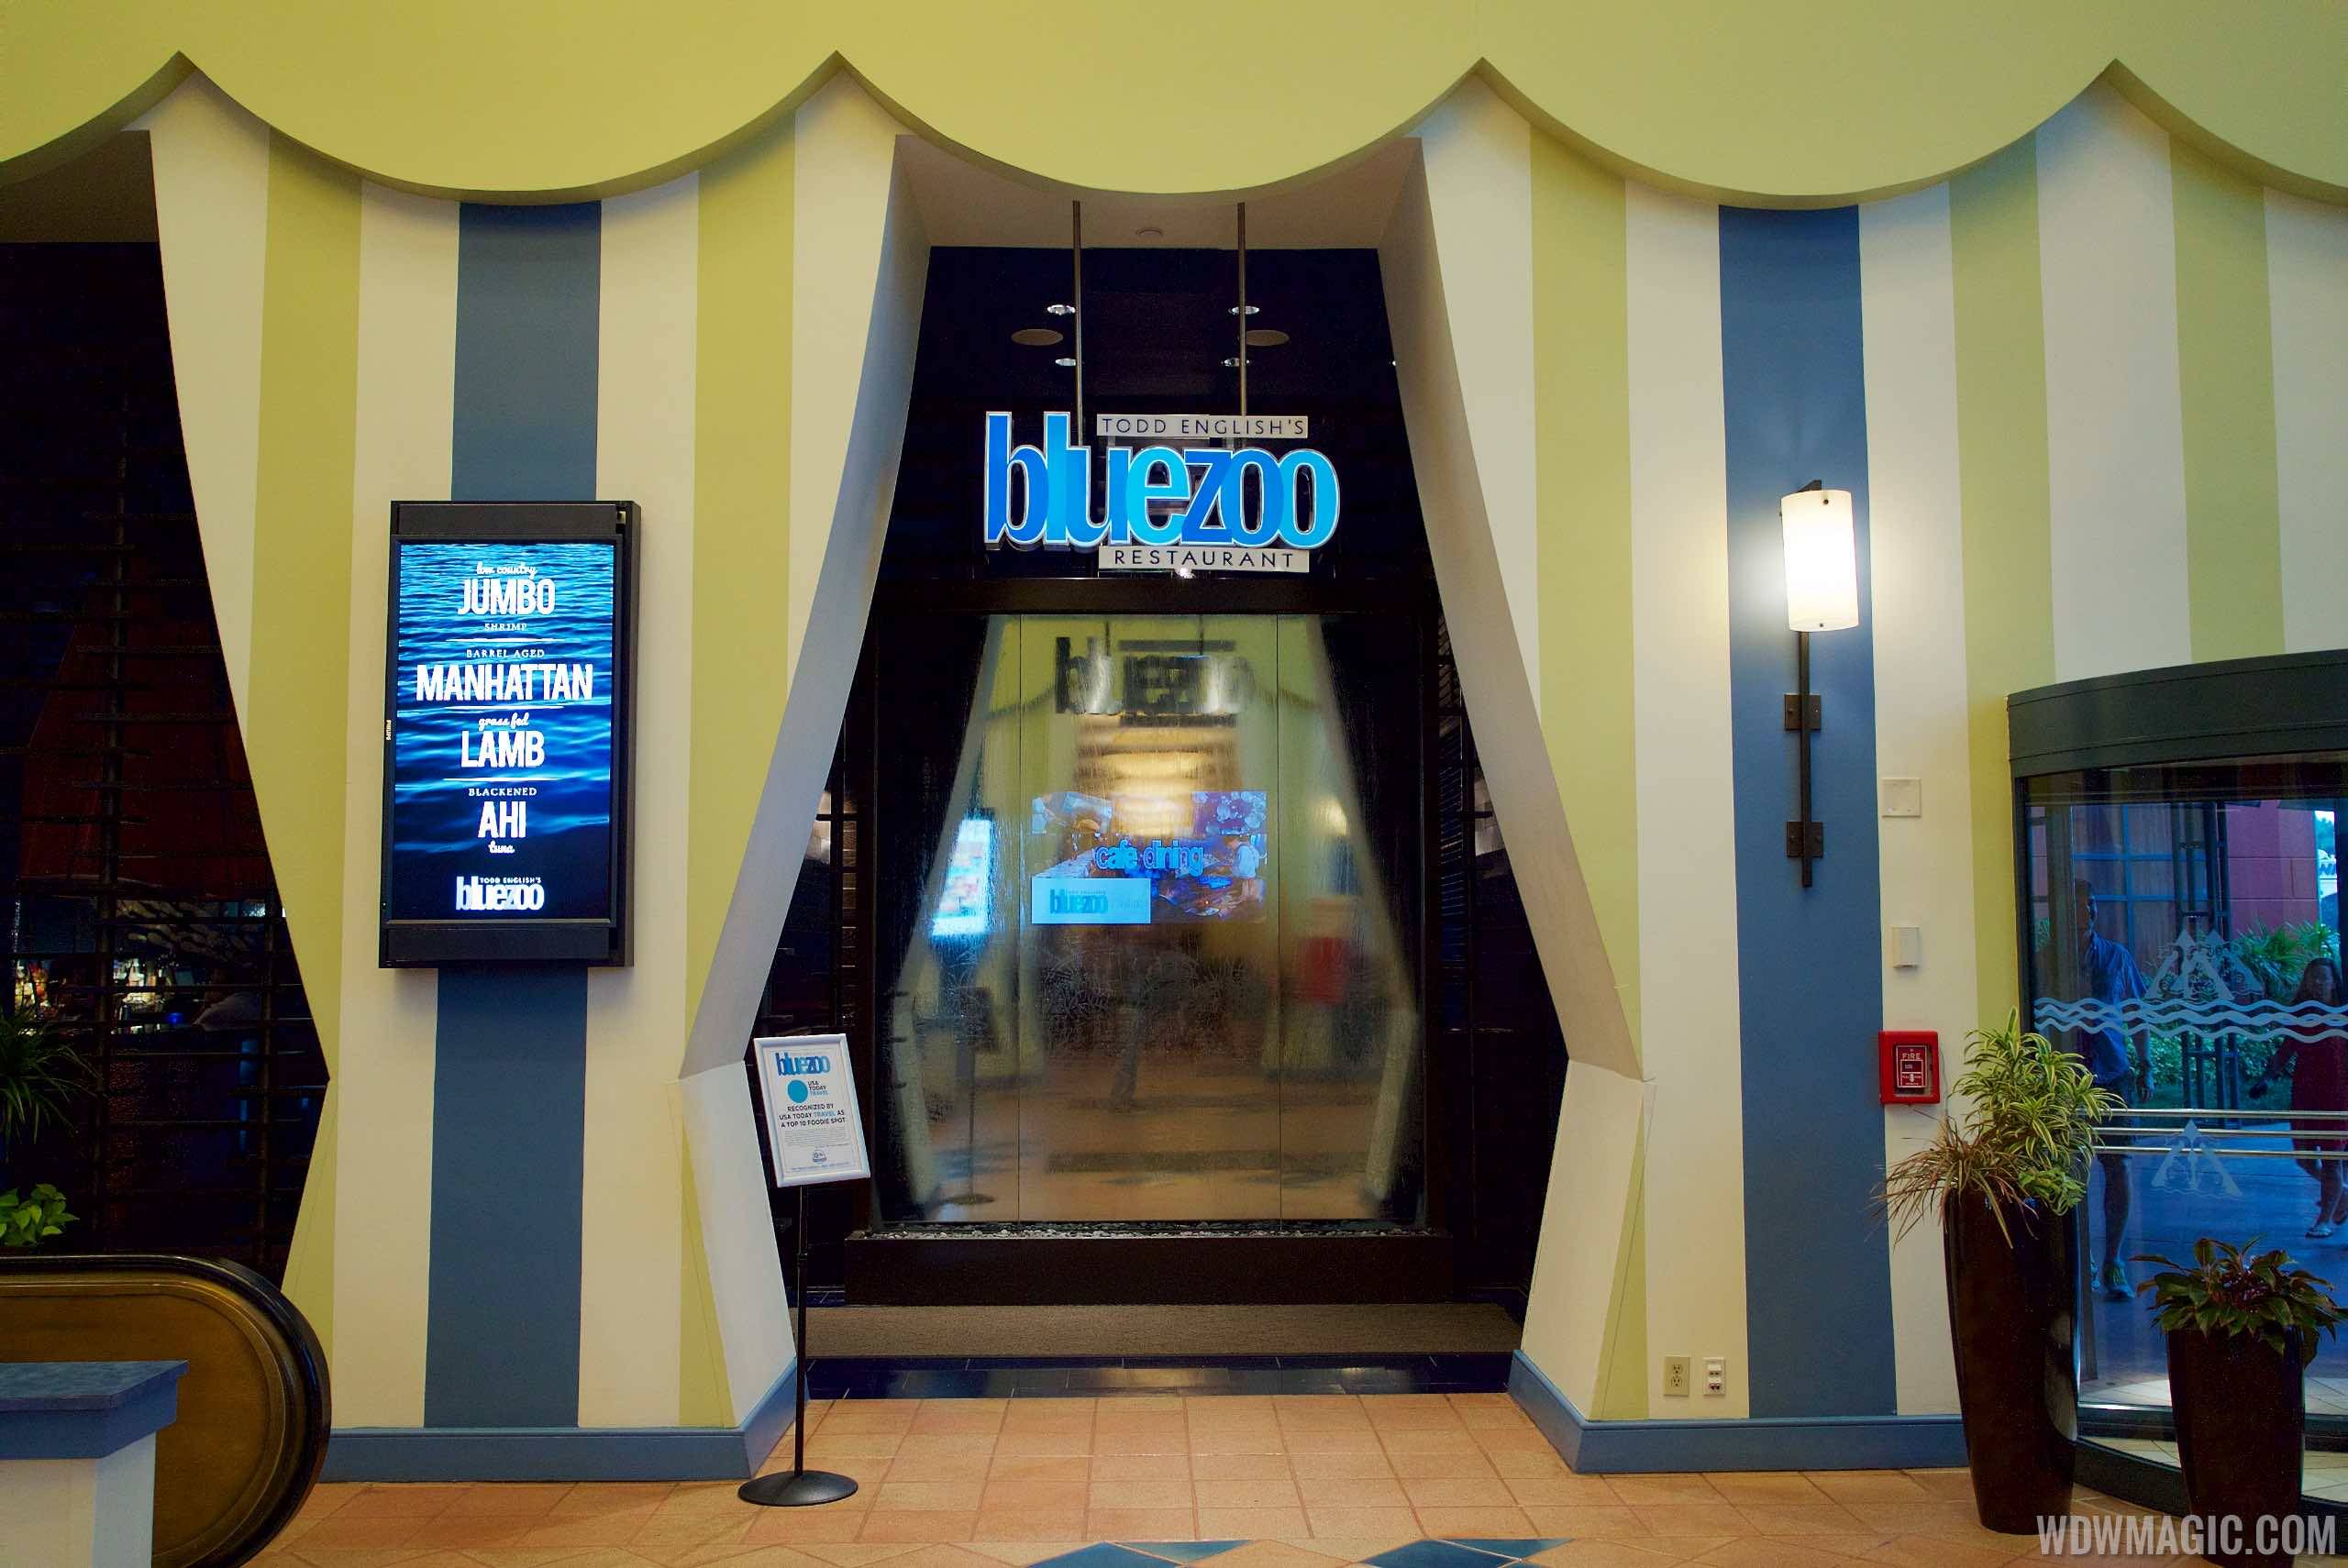 REVIEW - Todd English's bluezoo at the Walt Disney World Dolphin